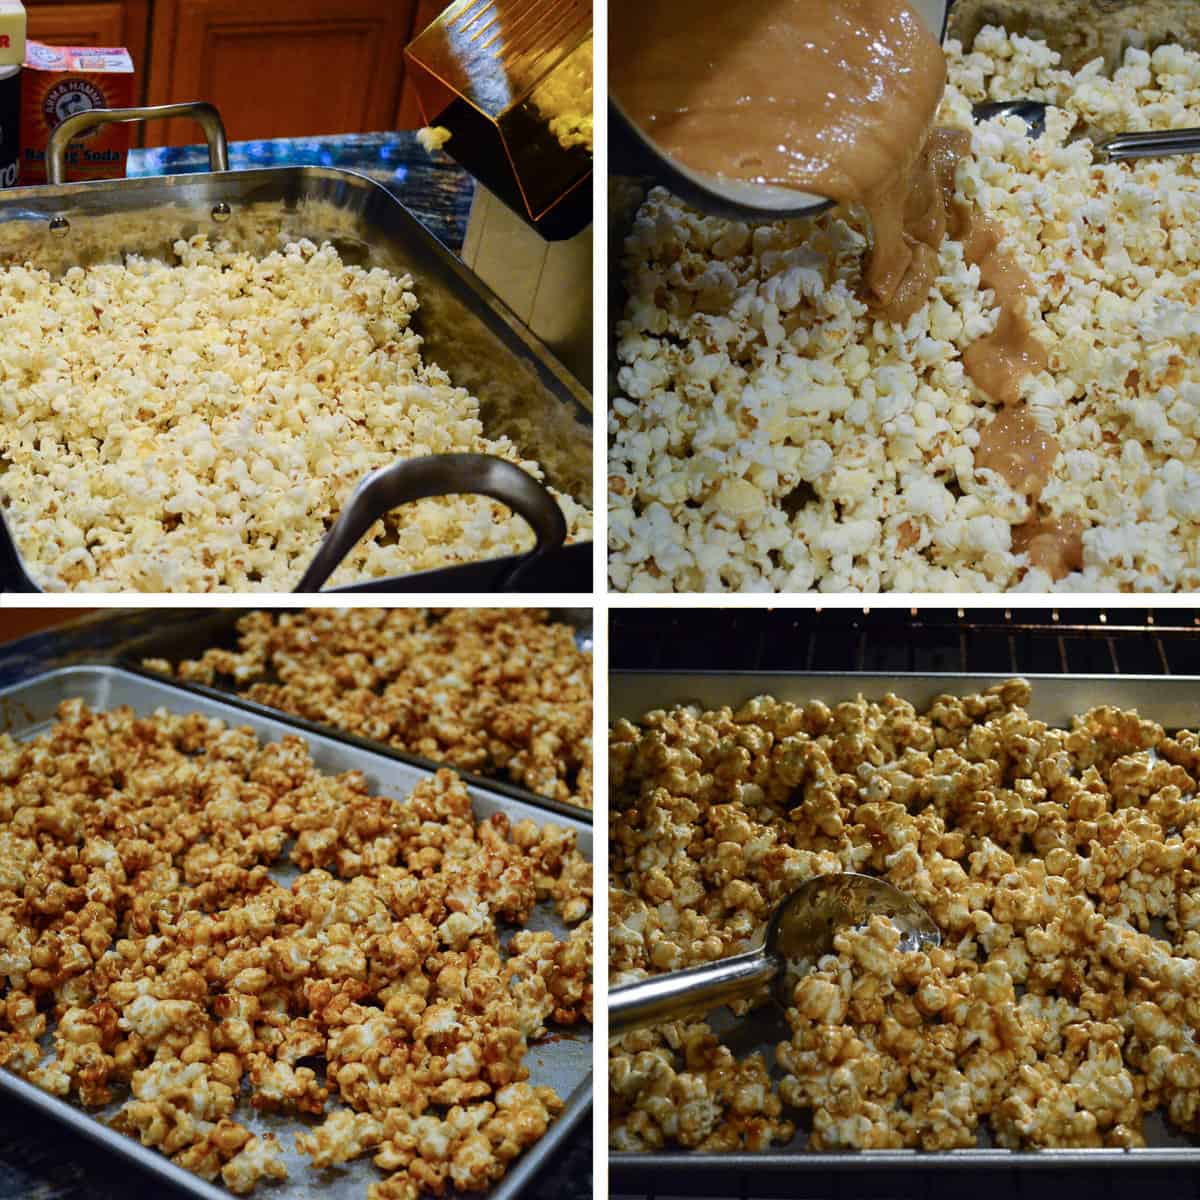 Corn being popped into a large roasting pan, it's coated with a caramel mixture and baked on a baking sheet.